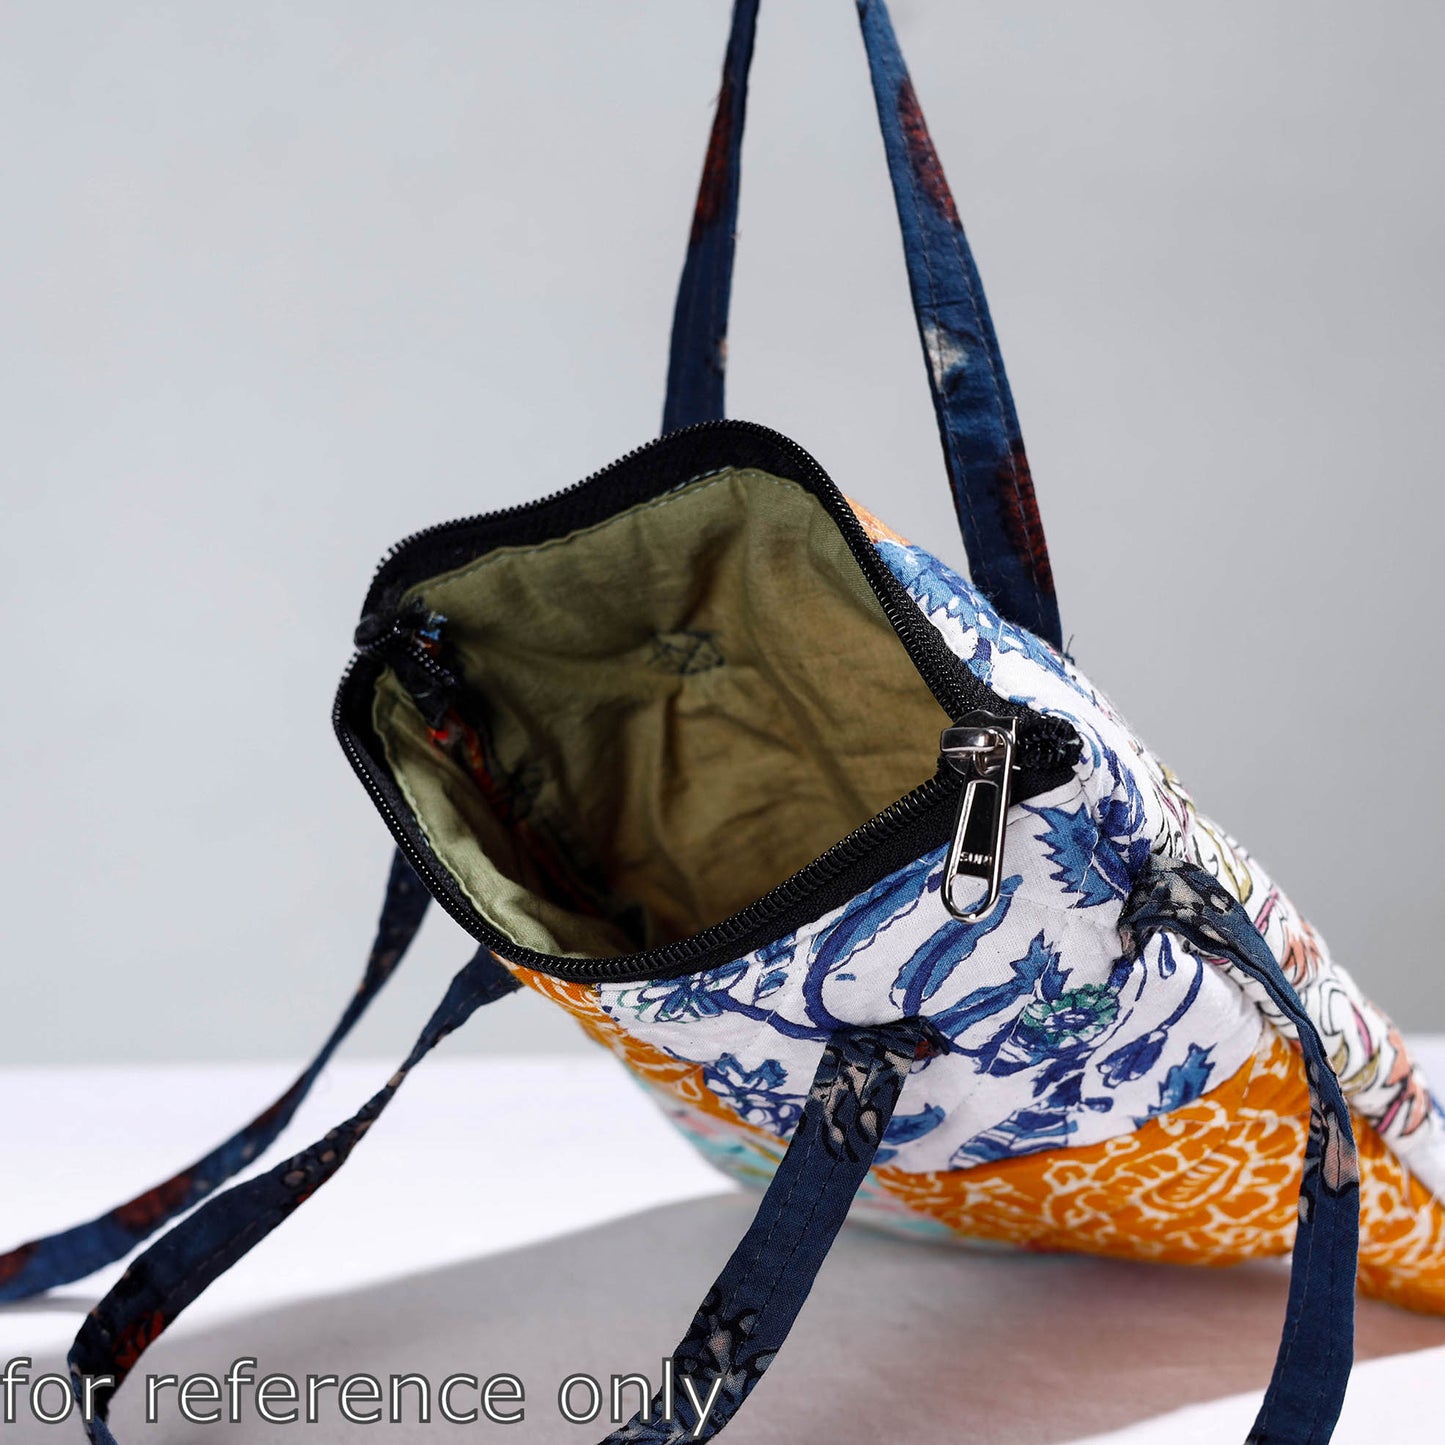 Multicolor - Handmade Quilted Cotton Patchwork Sling Bag 06